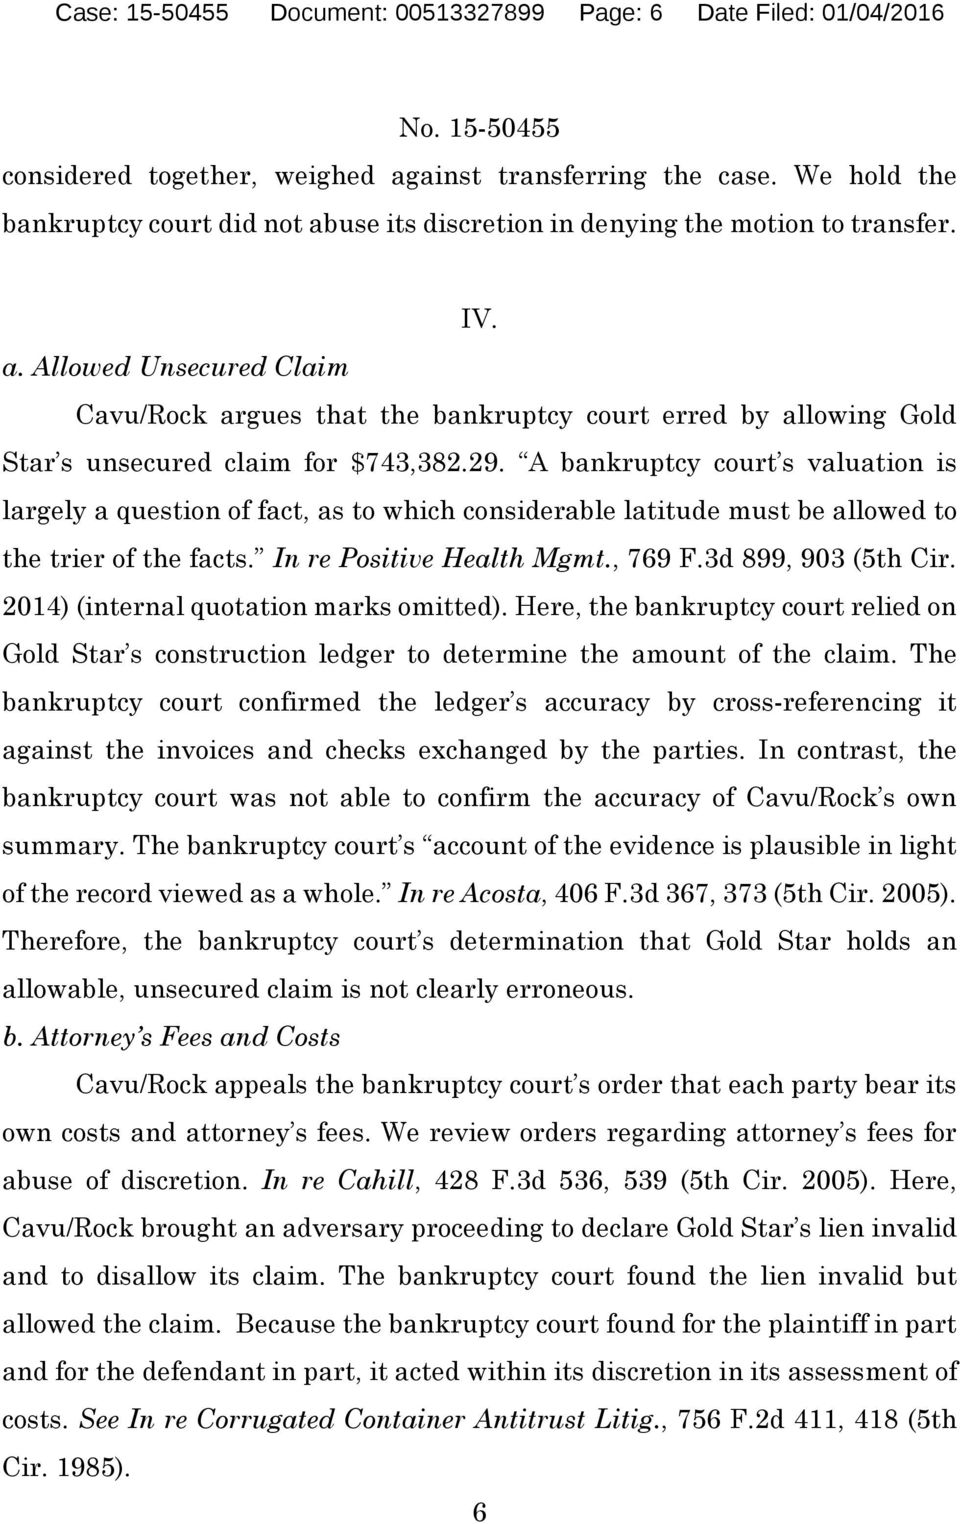 29. A bankruptcy court s valuation is largely a question of fact, as to which considerable latitude must be allowed to the trier of the facts. In re Positive Health Mgmt., 769 F.3d 899, 903 (5th Cir.